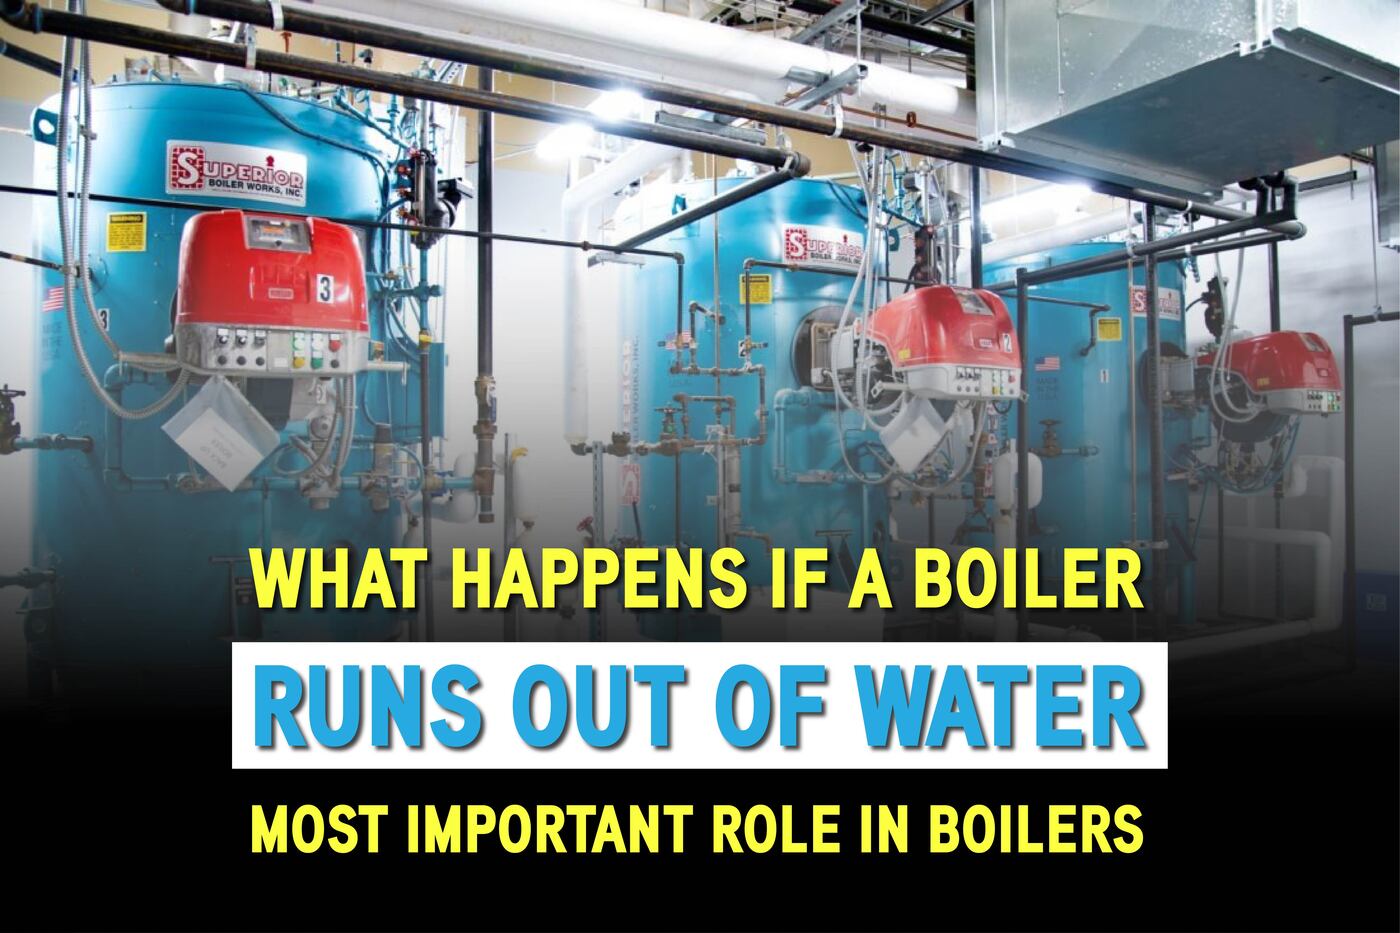 What happens if a boiler runs out of water?